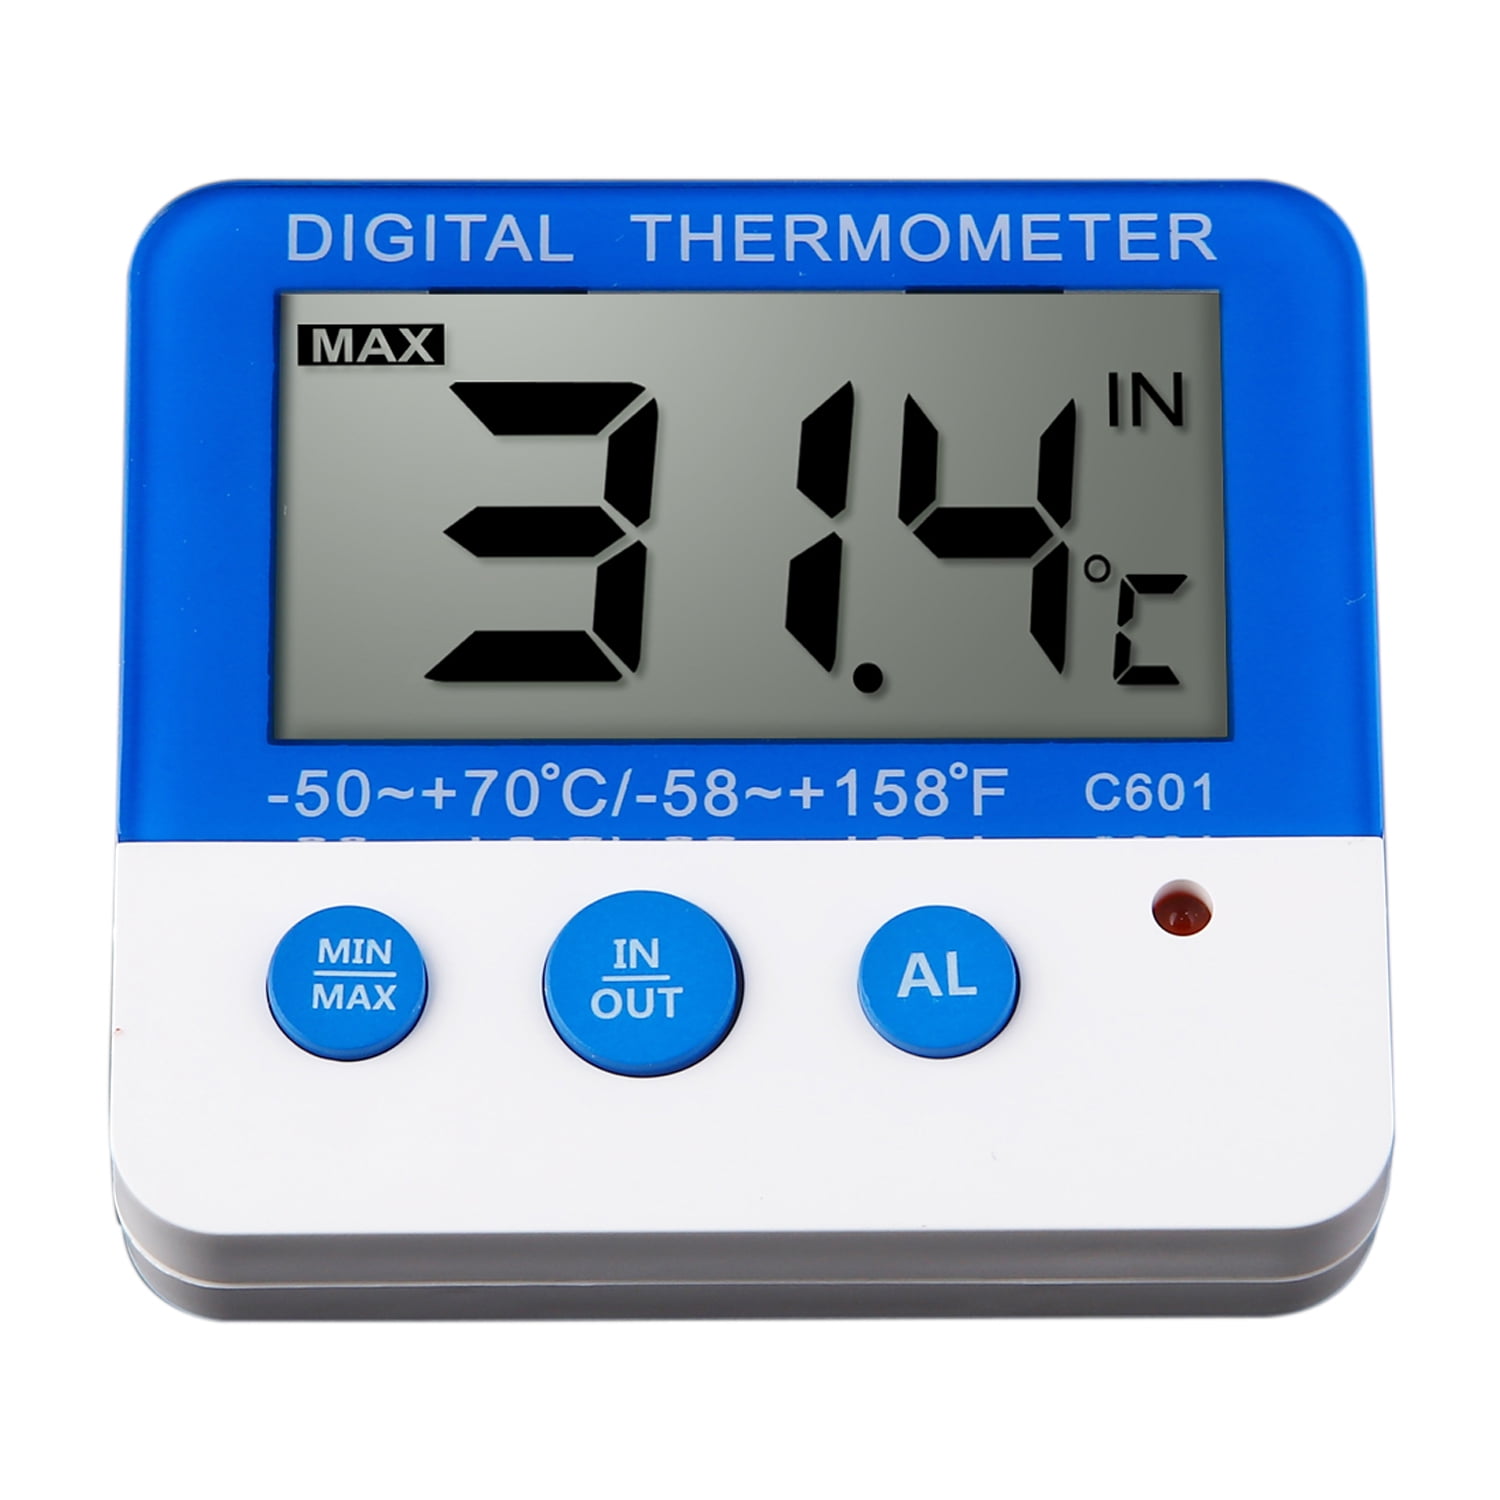 Moreoustitory Digital Waterproof Refrigerator Thermometer LCD Display Freezer Temperature Recorder 